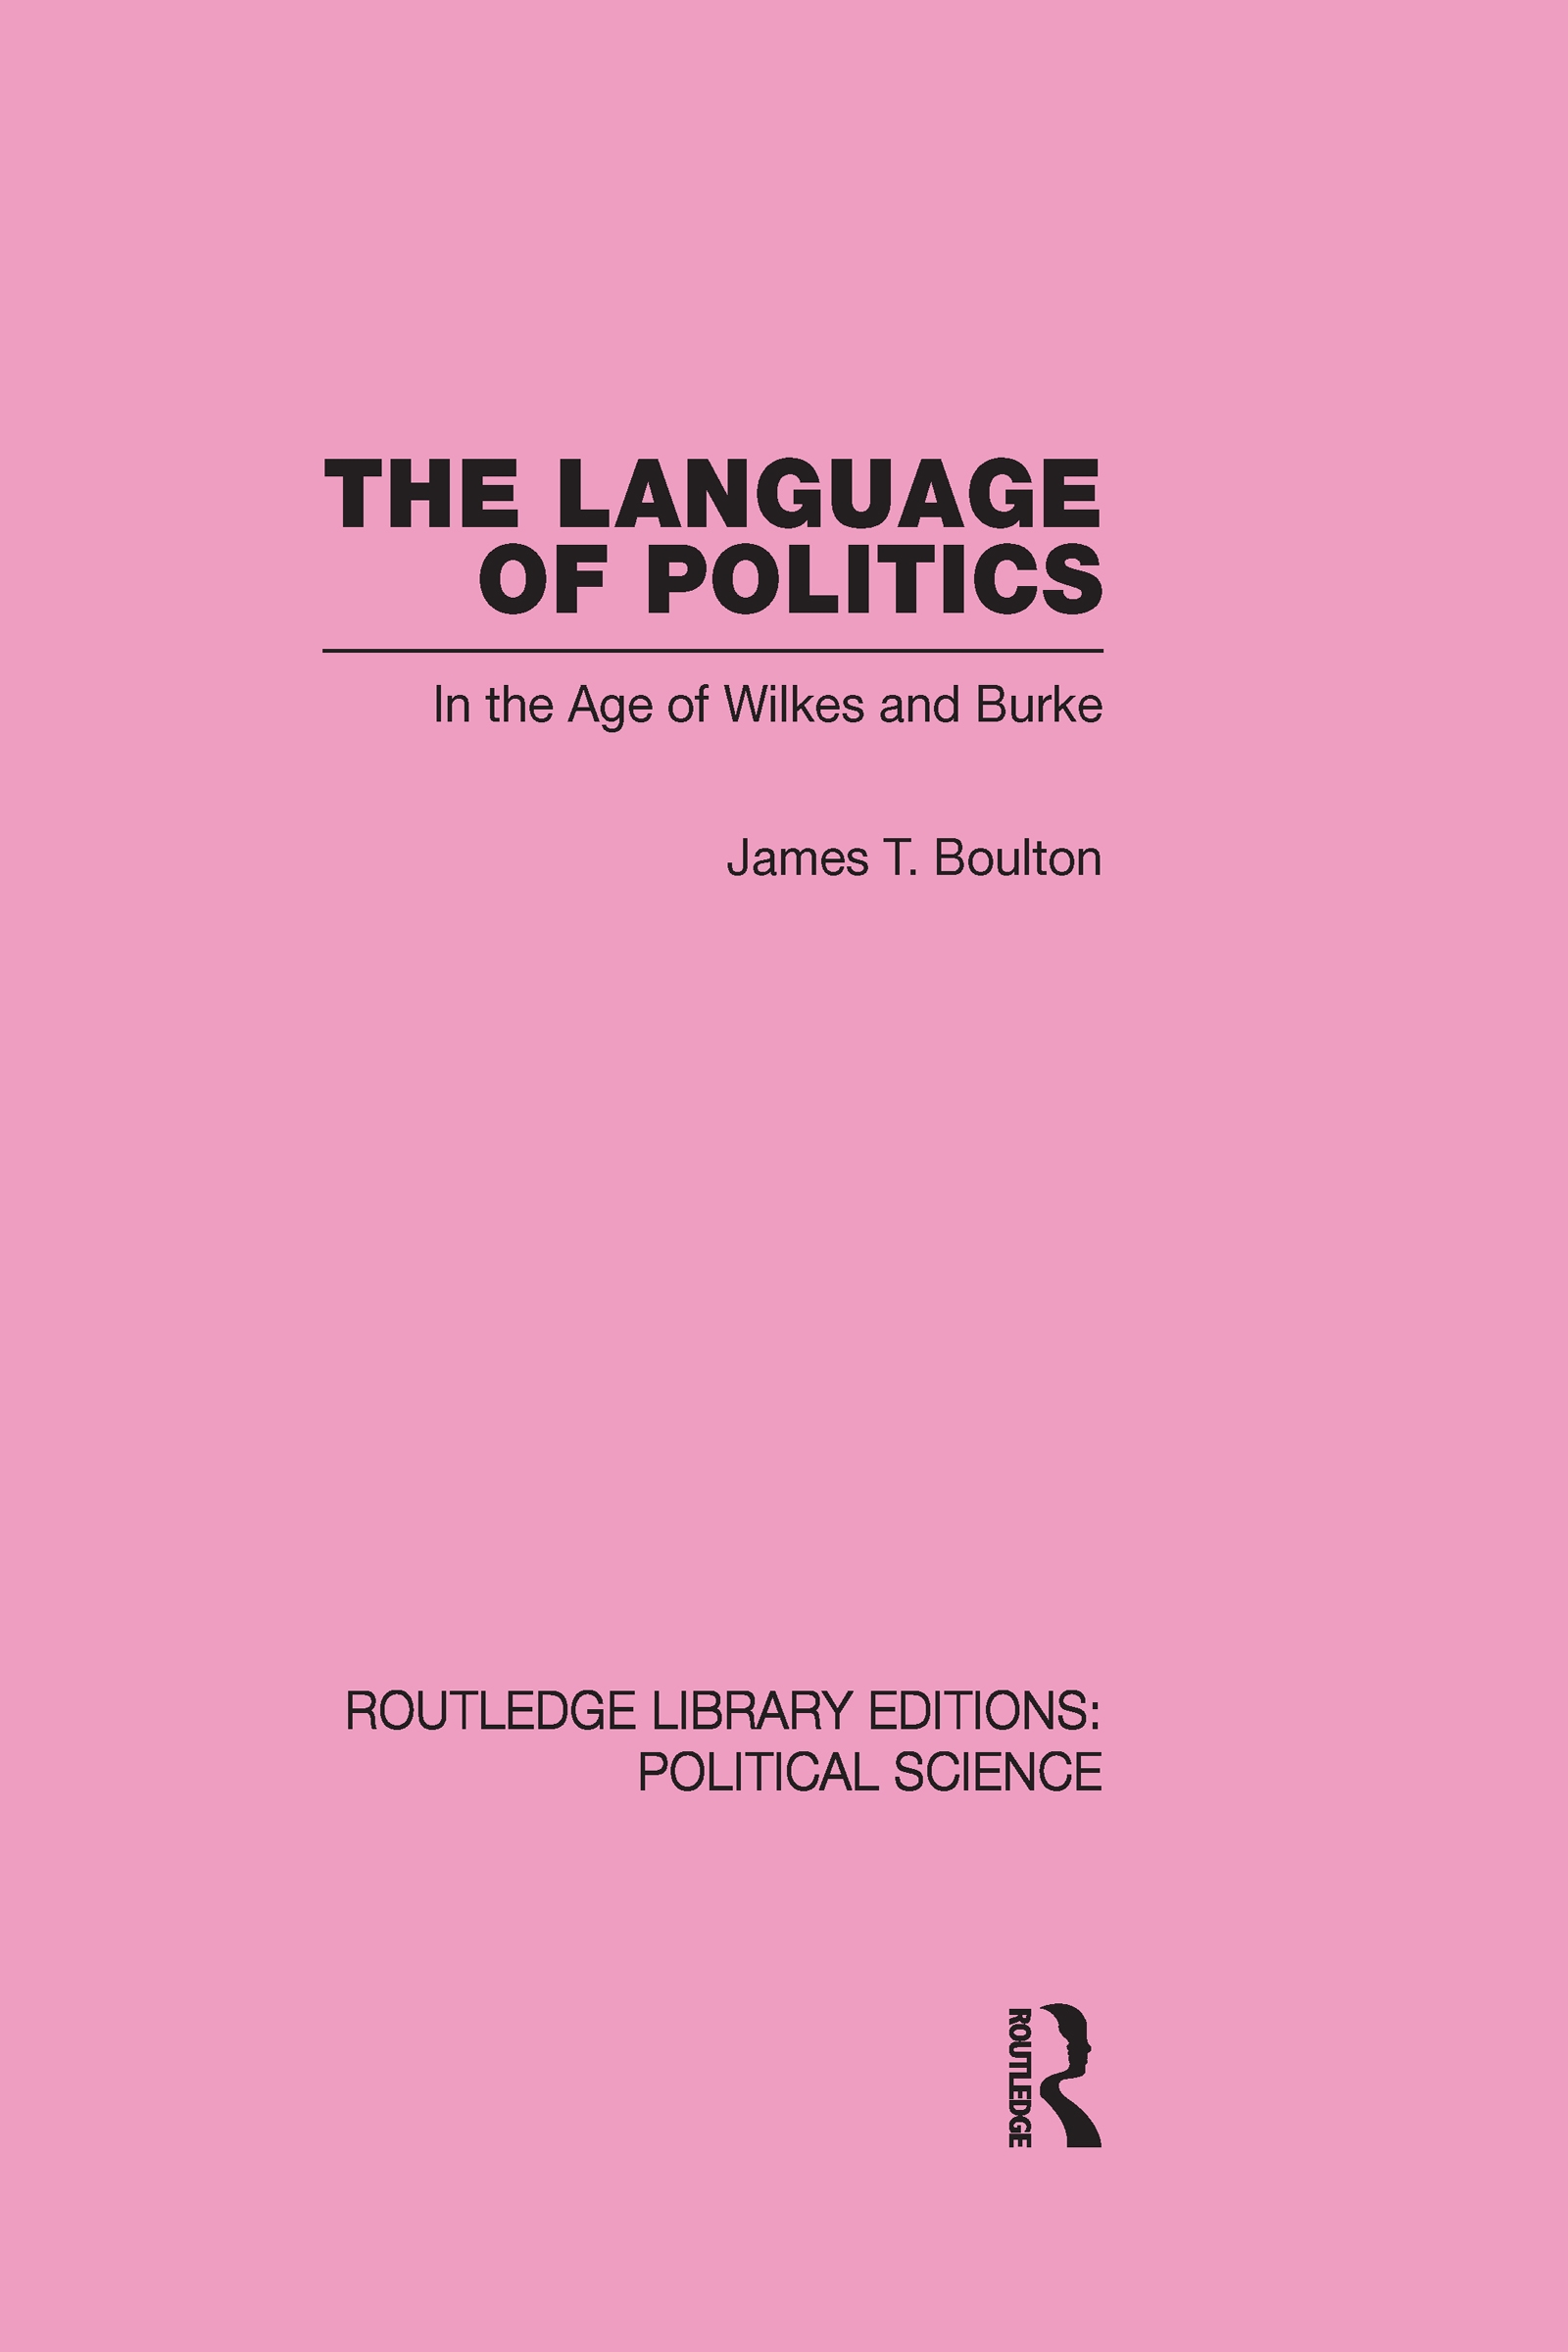 The Language of Politics: In the Age of Wilkes and Burke